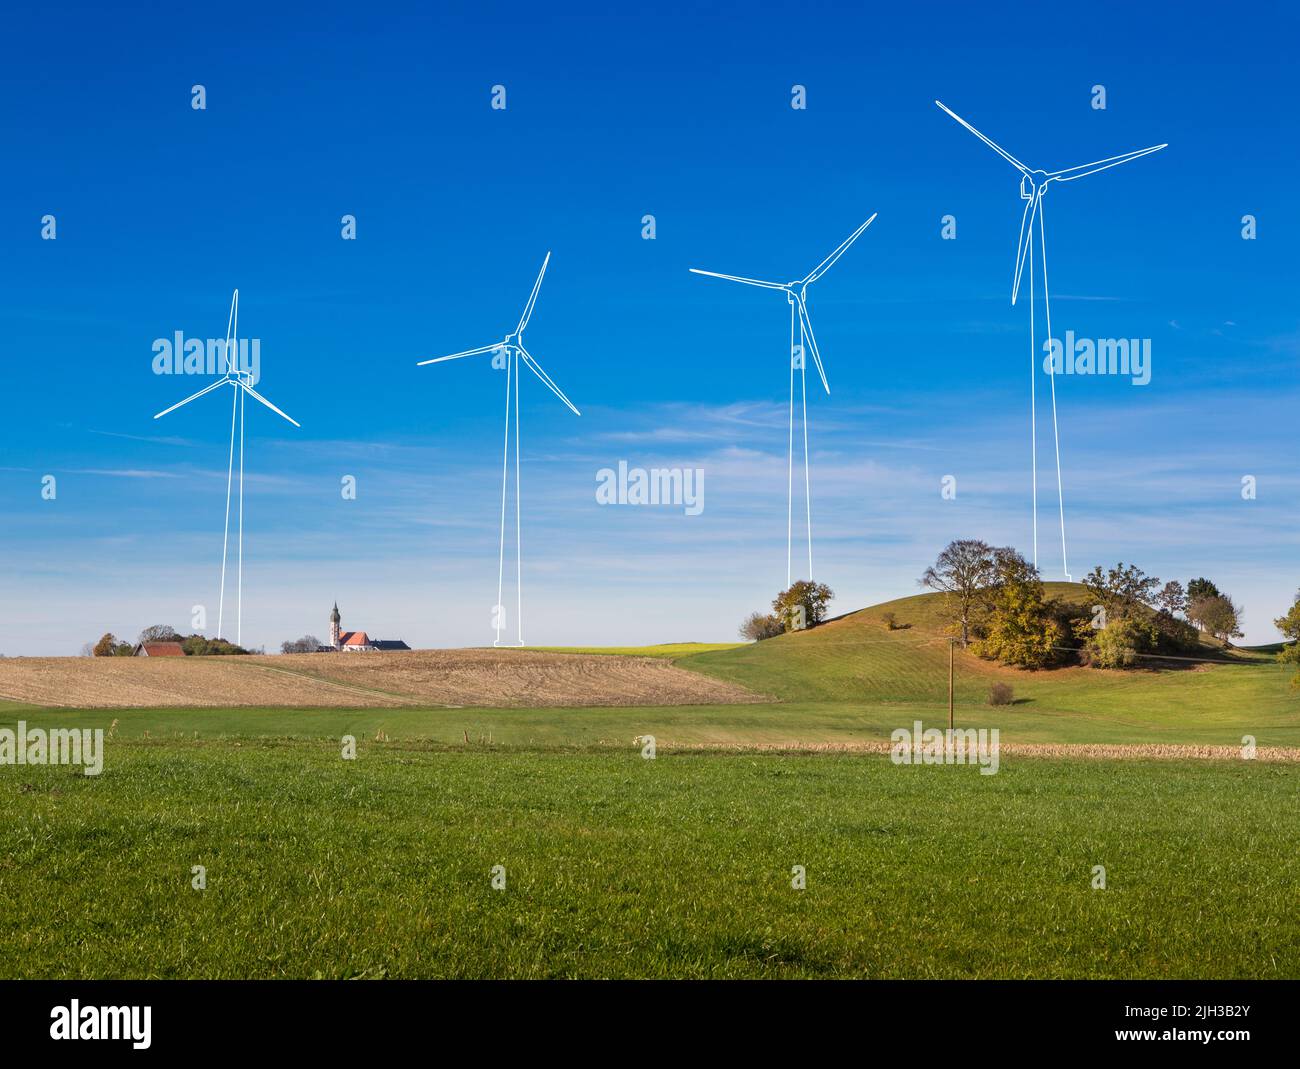 Projected Windmills in rural landscape with church tower. Outlines of windmills composited into a landscape image to show the optical impact of erecti Stock Photo